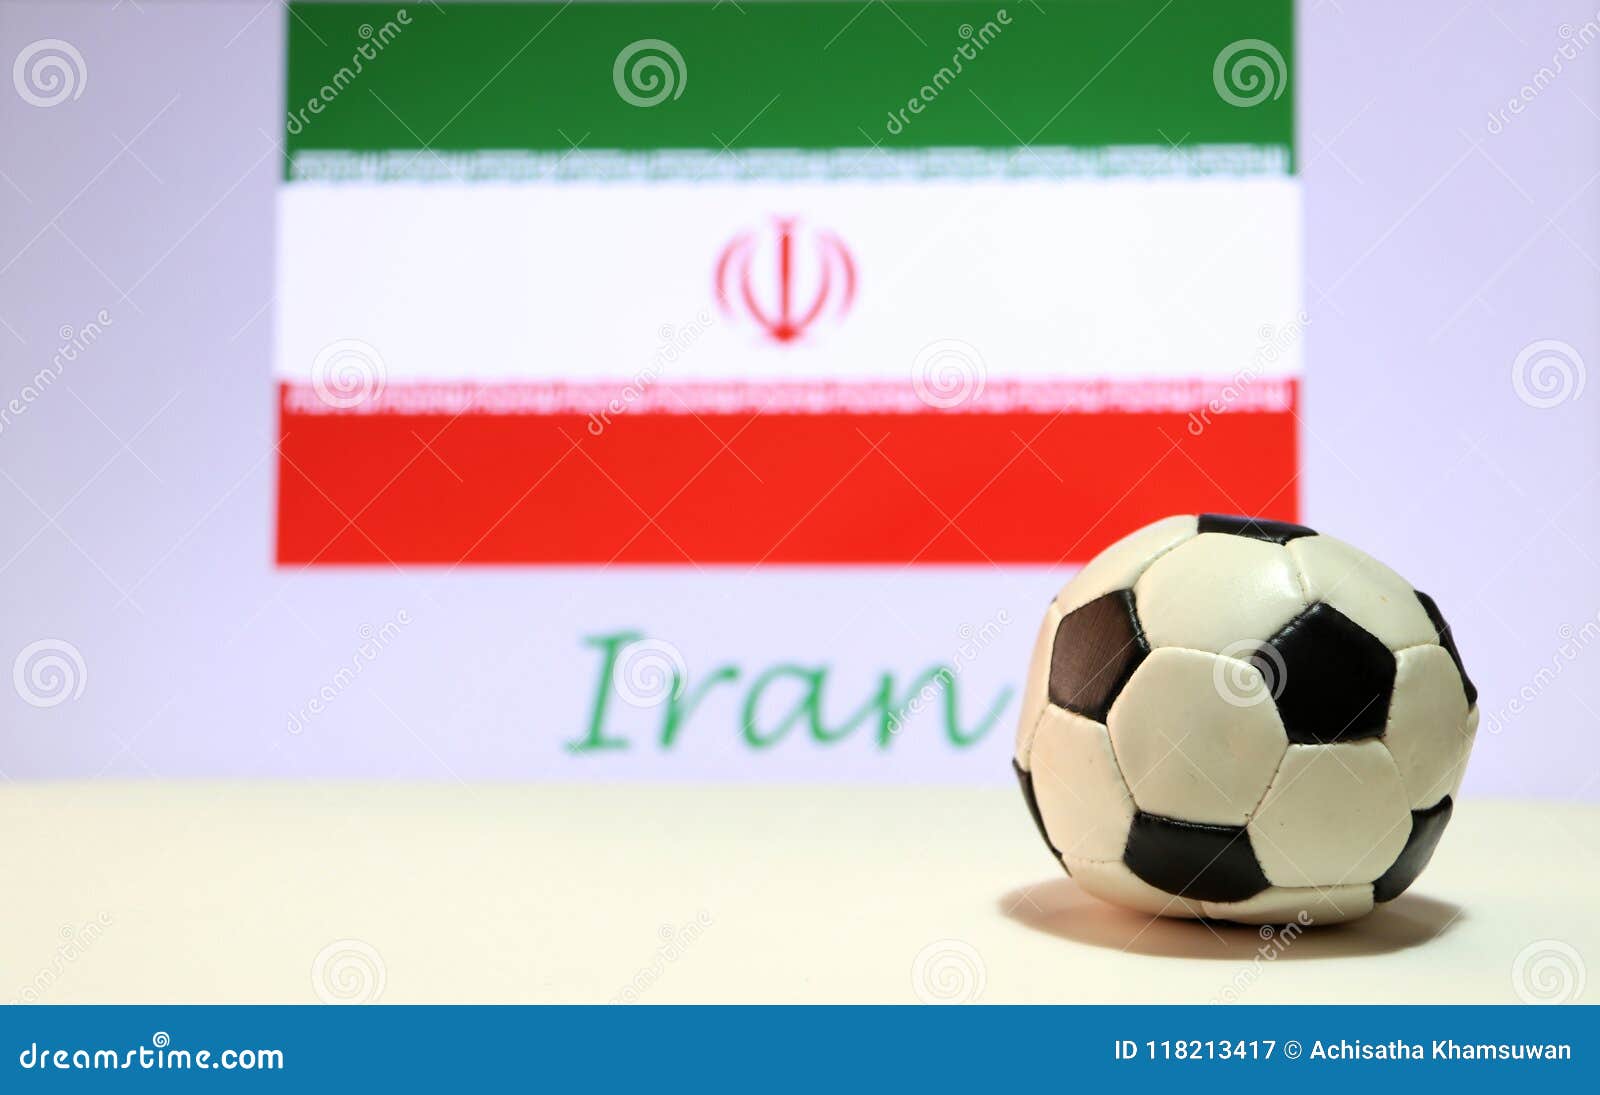 Small Football on the White Floor and Iranian Nation Flag with the Text ...